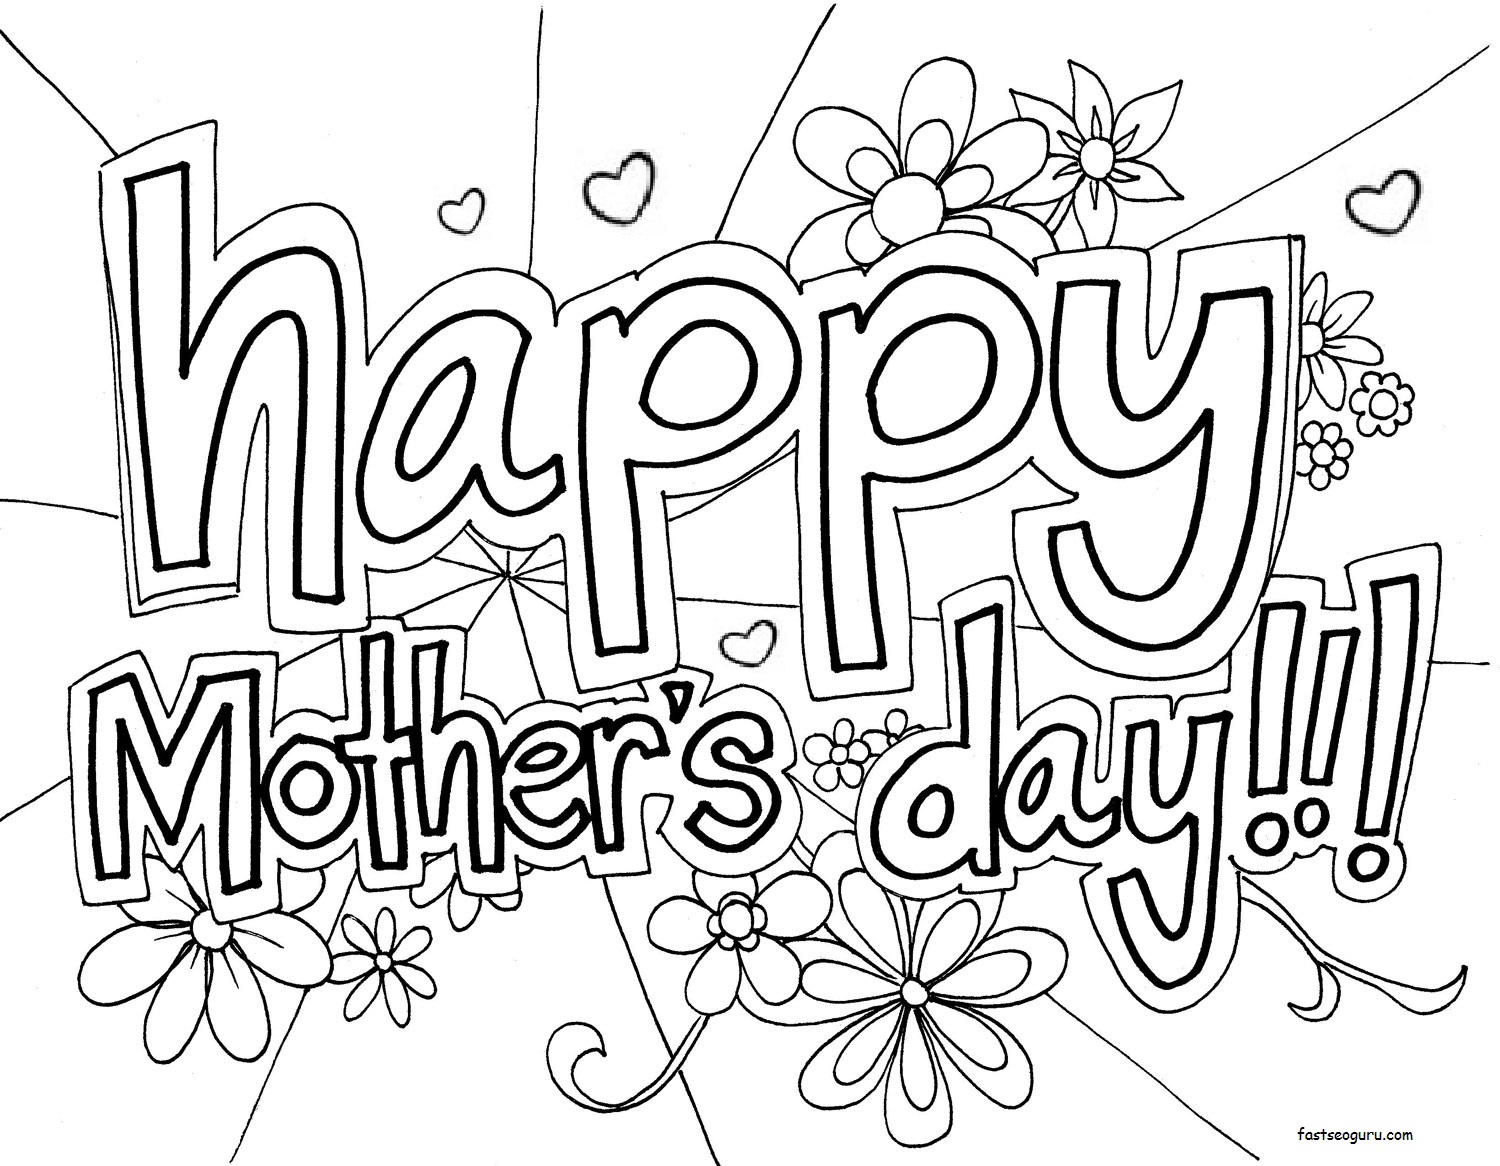 3-printable-mother-s-day-cards-to-color-pdfs-freebie-finding-mom